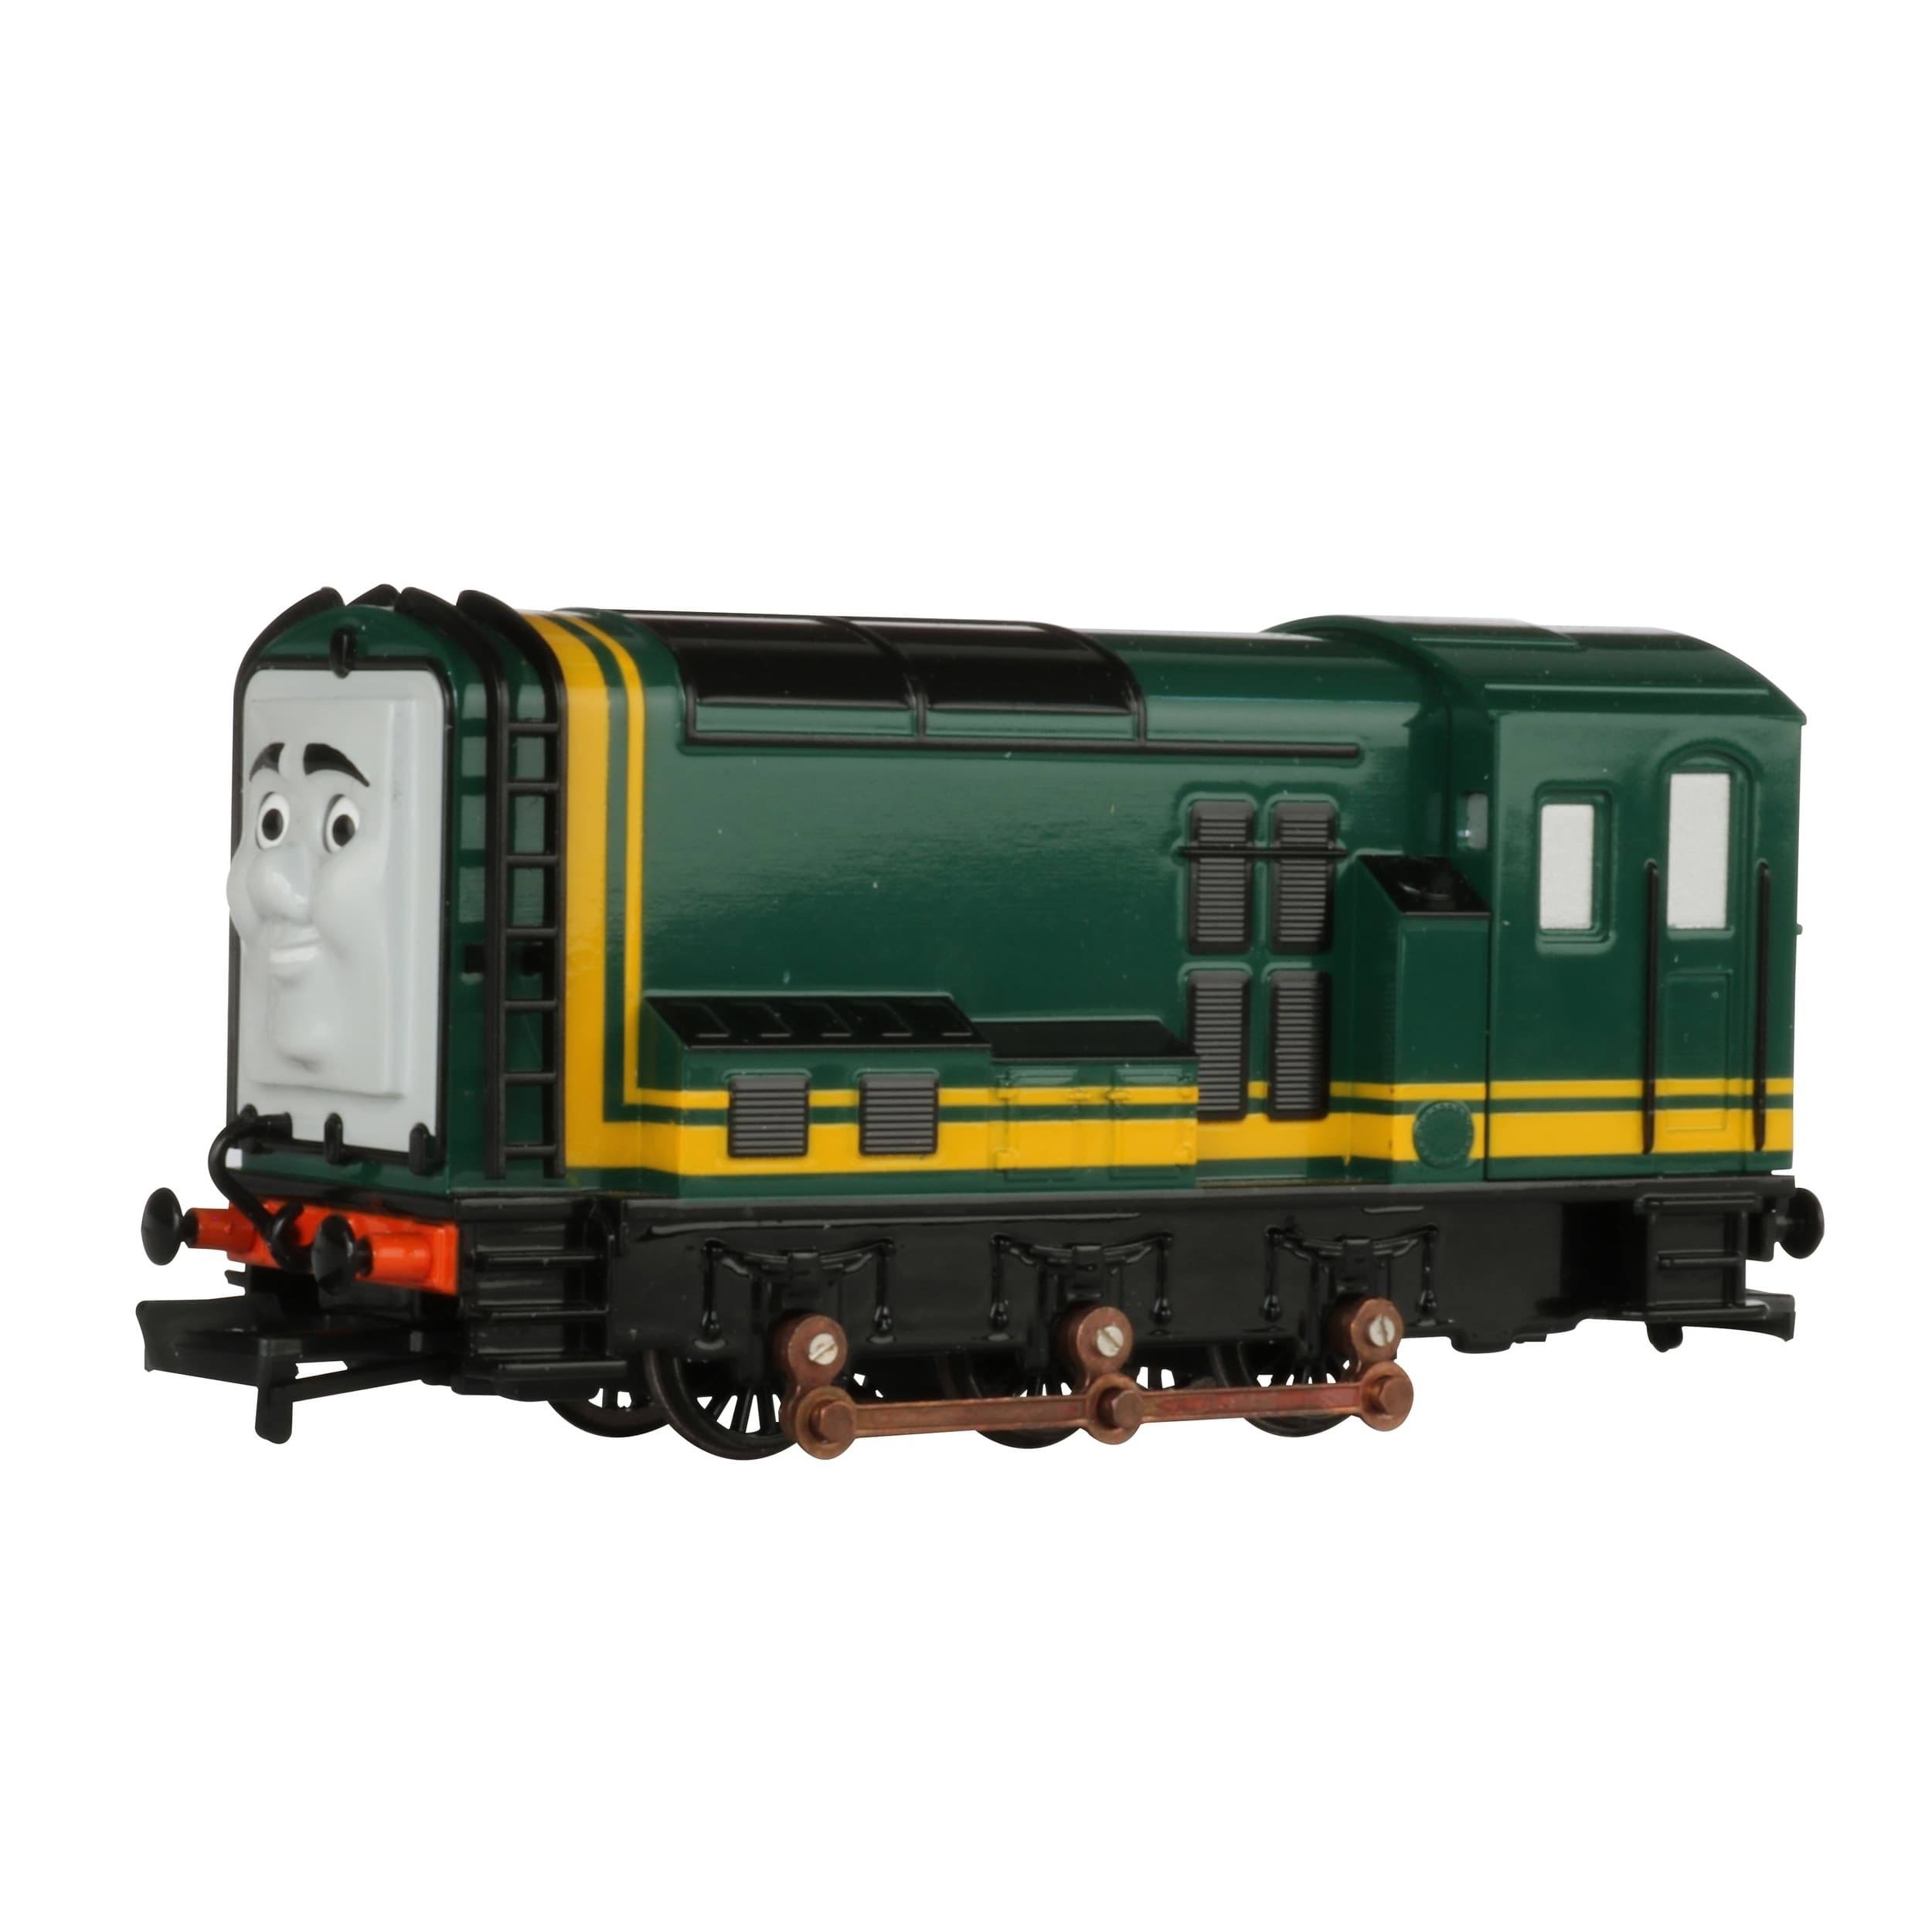 Bachmann Trains Paxton Locomotive With Moving Eyes - HO Scale